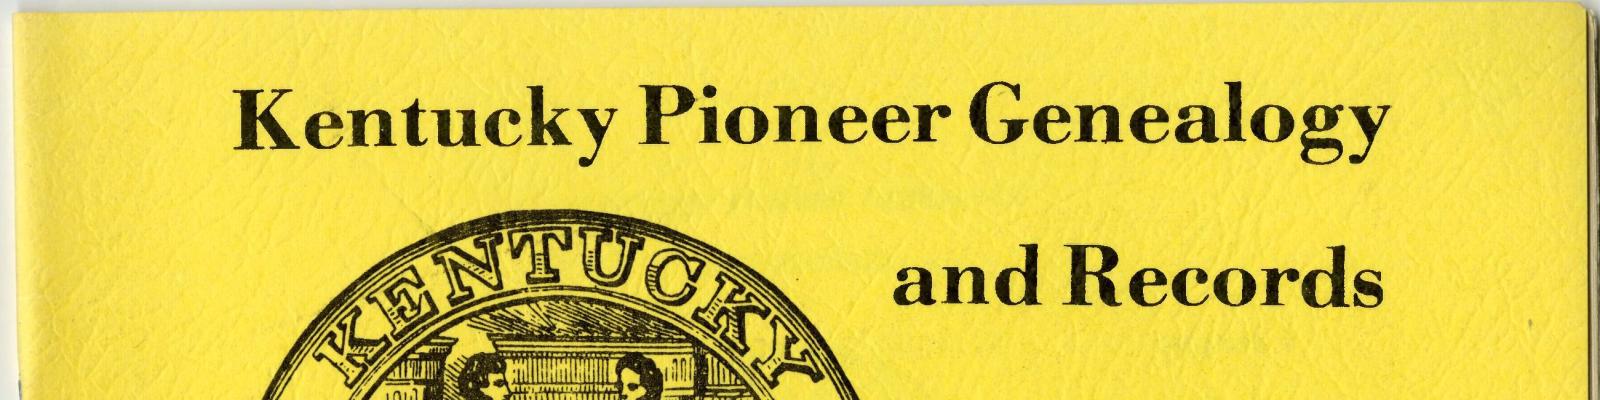 kentucky pioneer genealogy and records